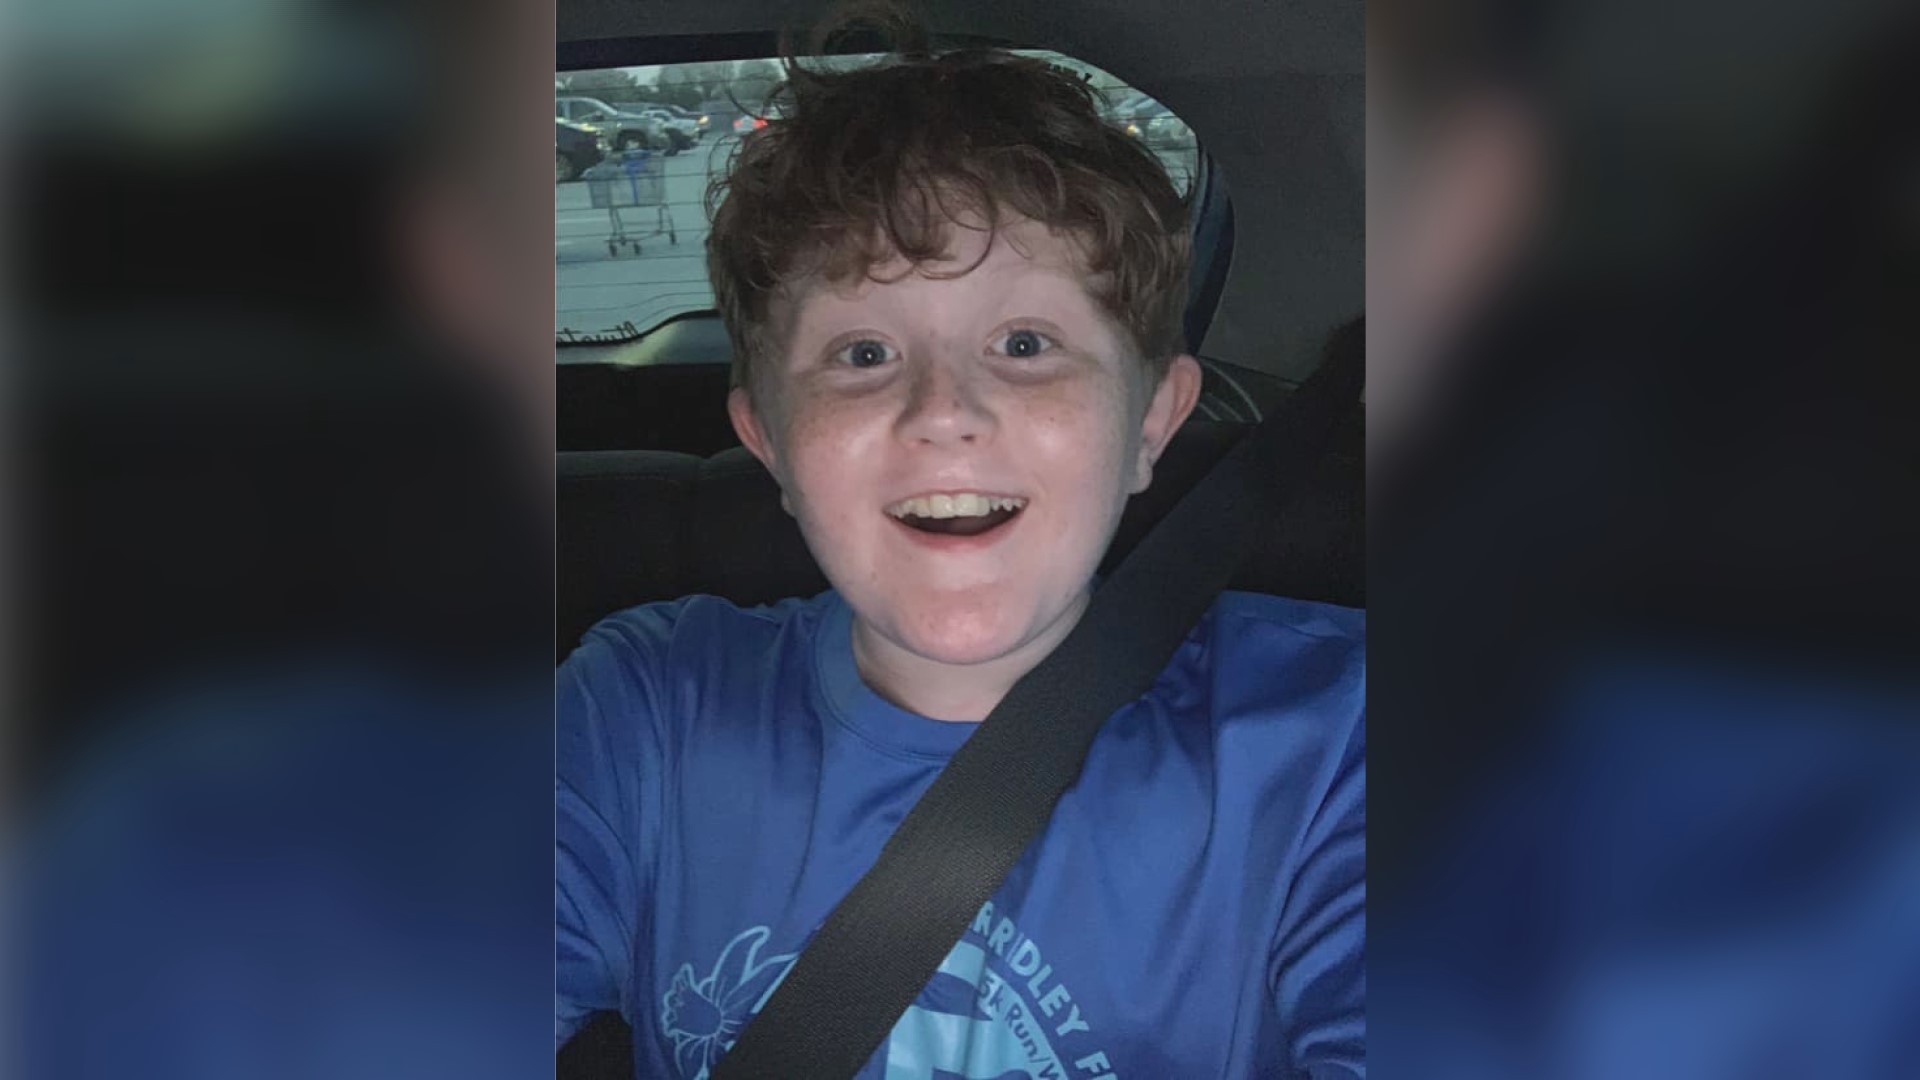 Bentonville's Alexander "Cade" Law passed away on Monday after being sucked into a storm drain. The family remembers him as they put together a GoFundMe for him.